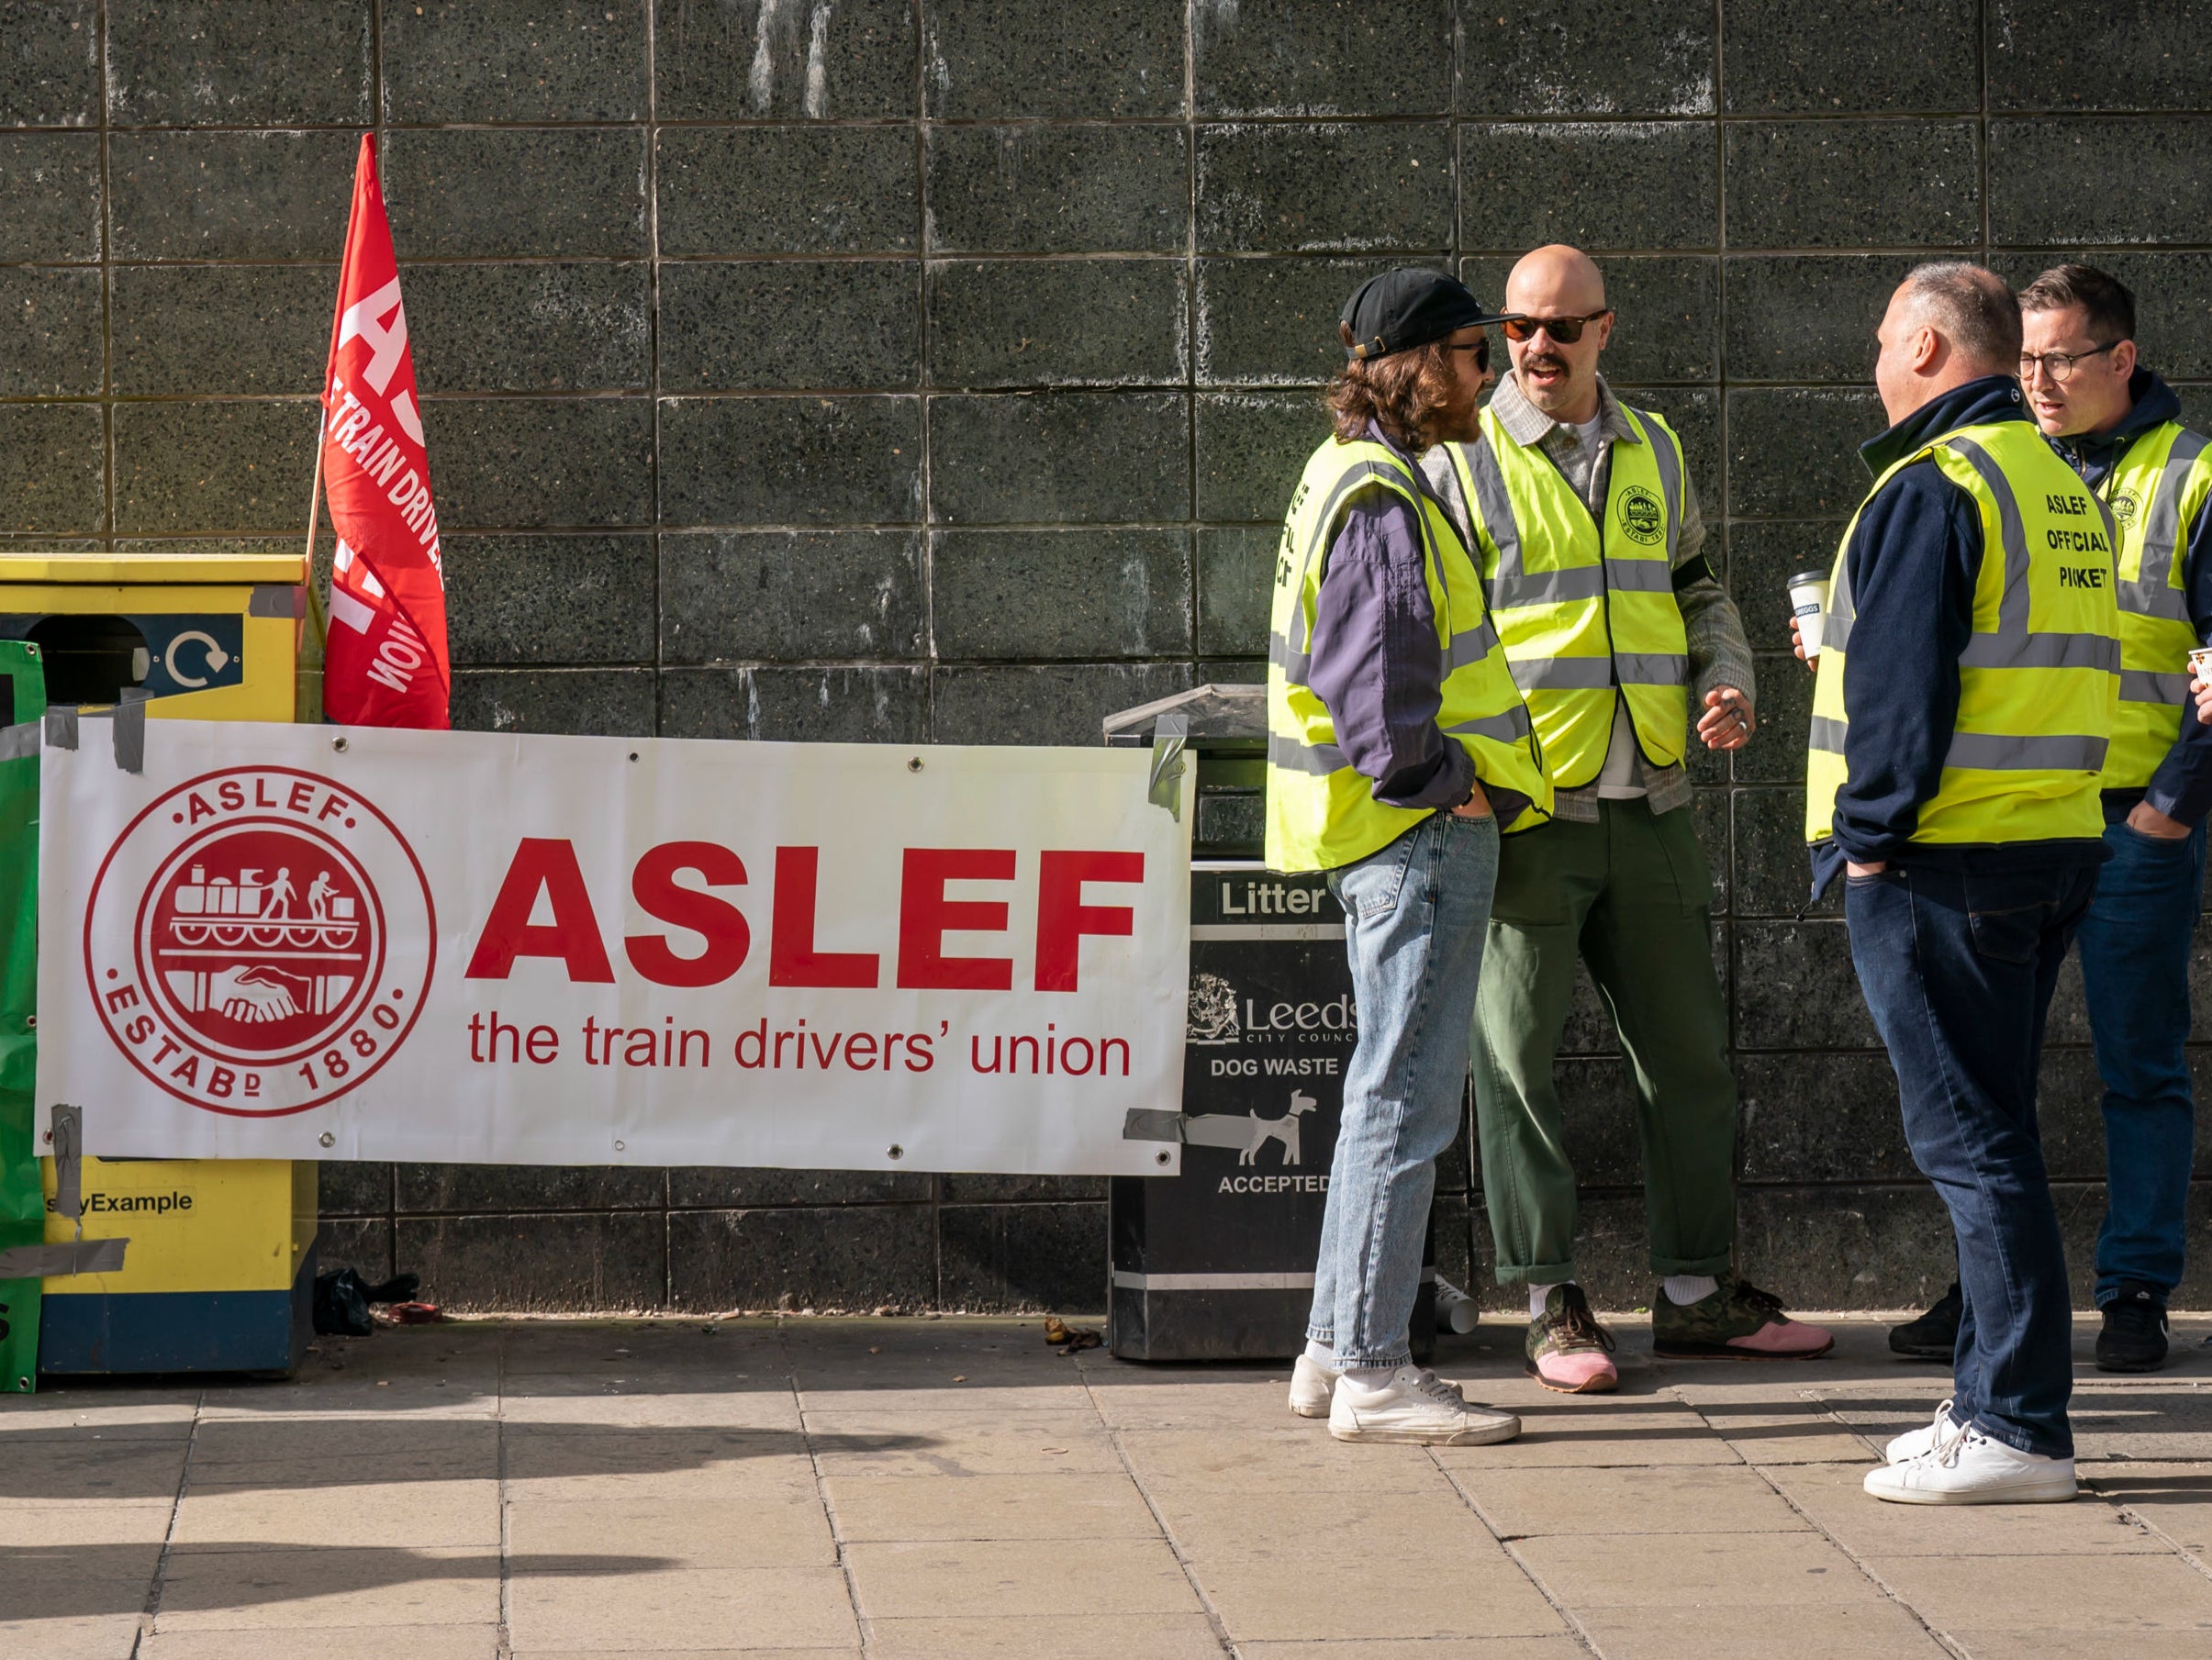 Members of the Aslef union on a picket line near to Leeds railway station